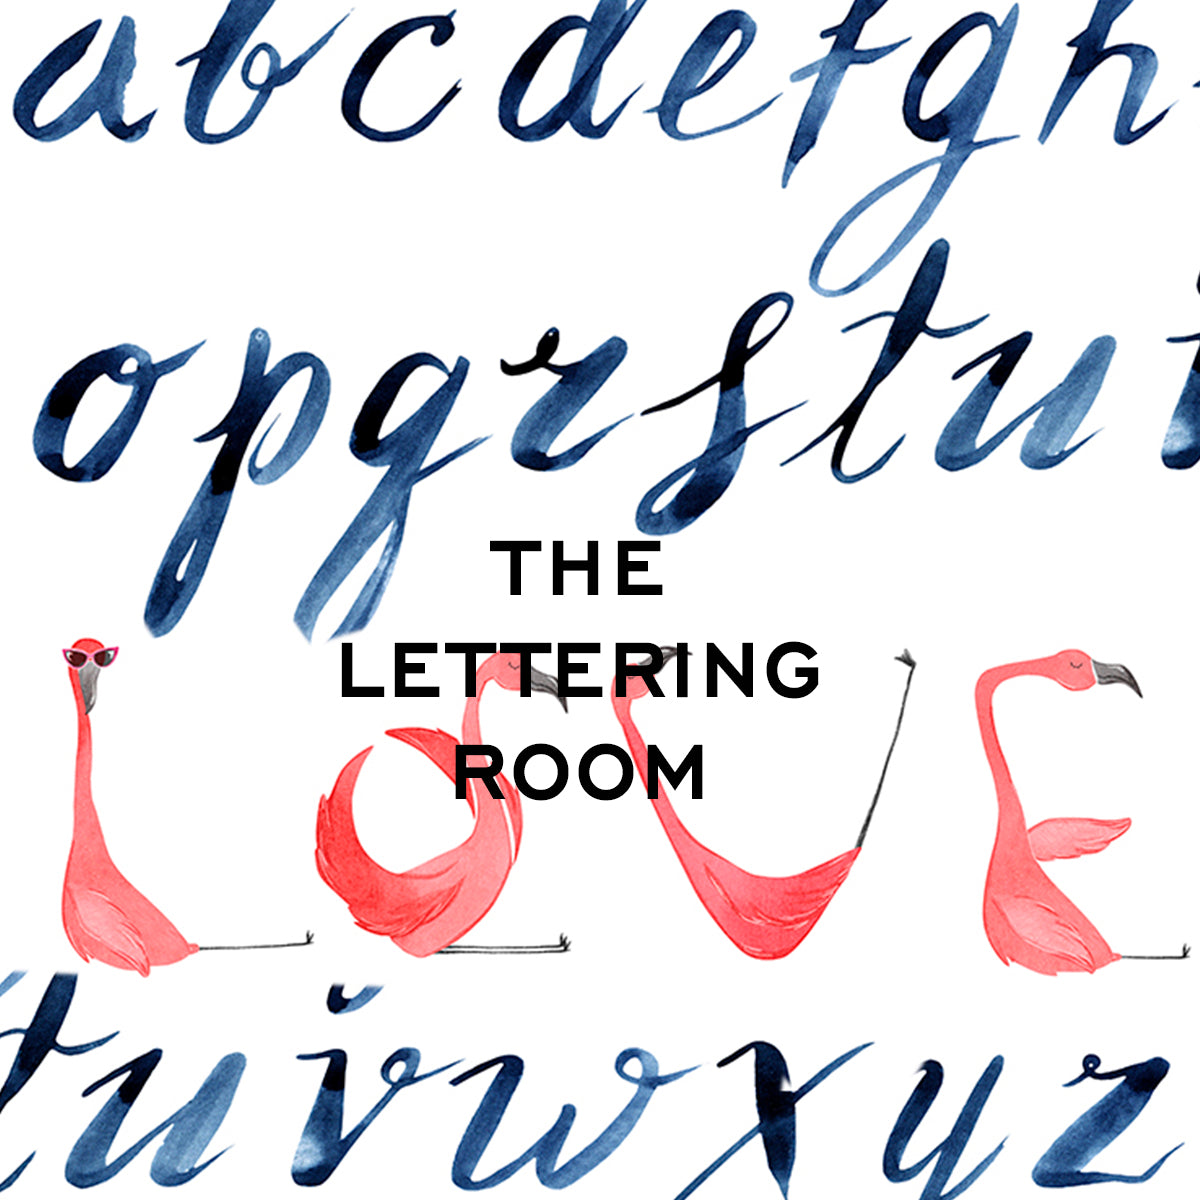 The Lettering Room